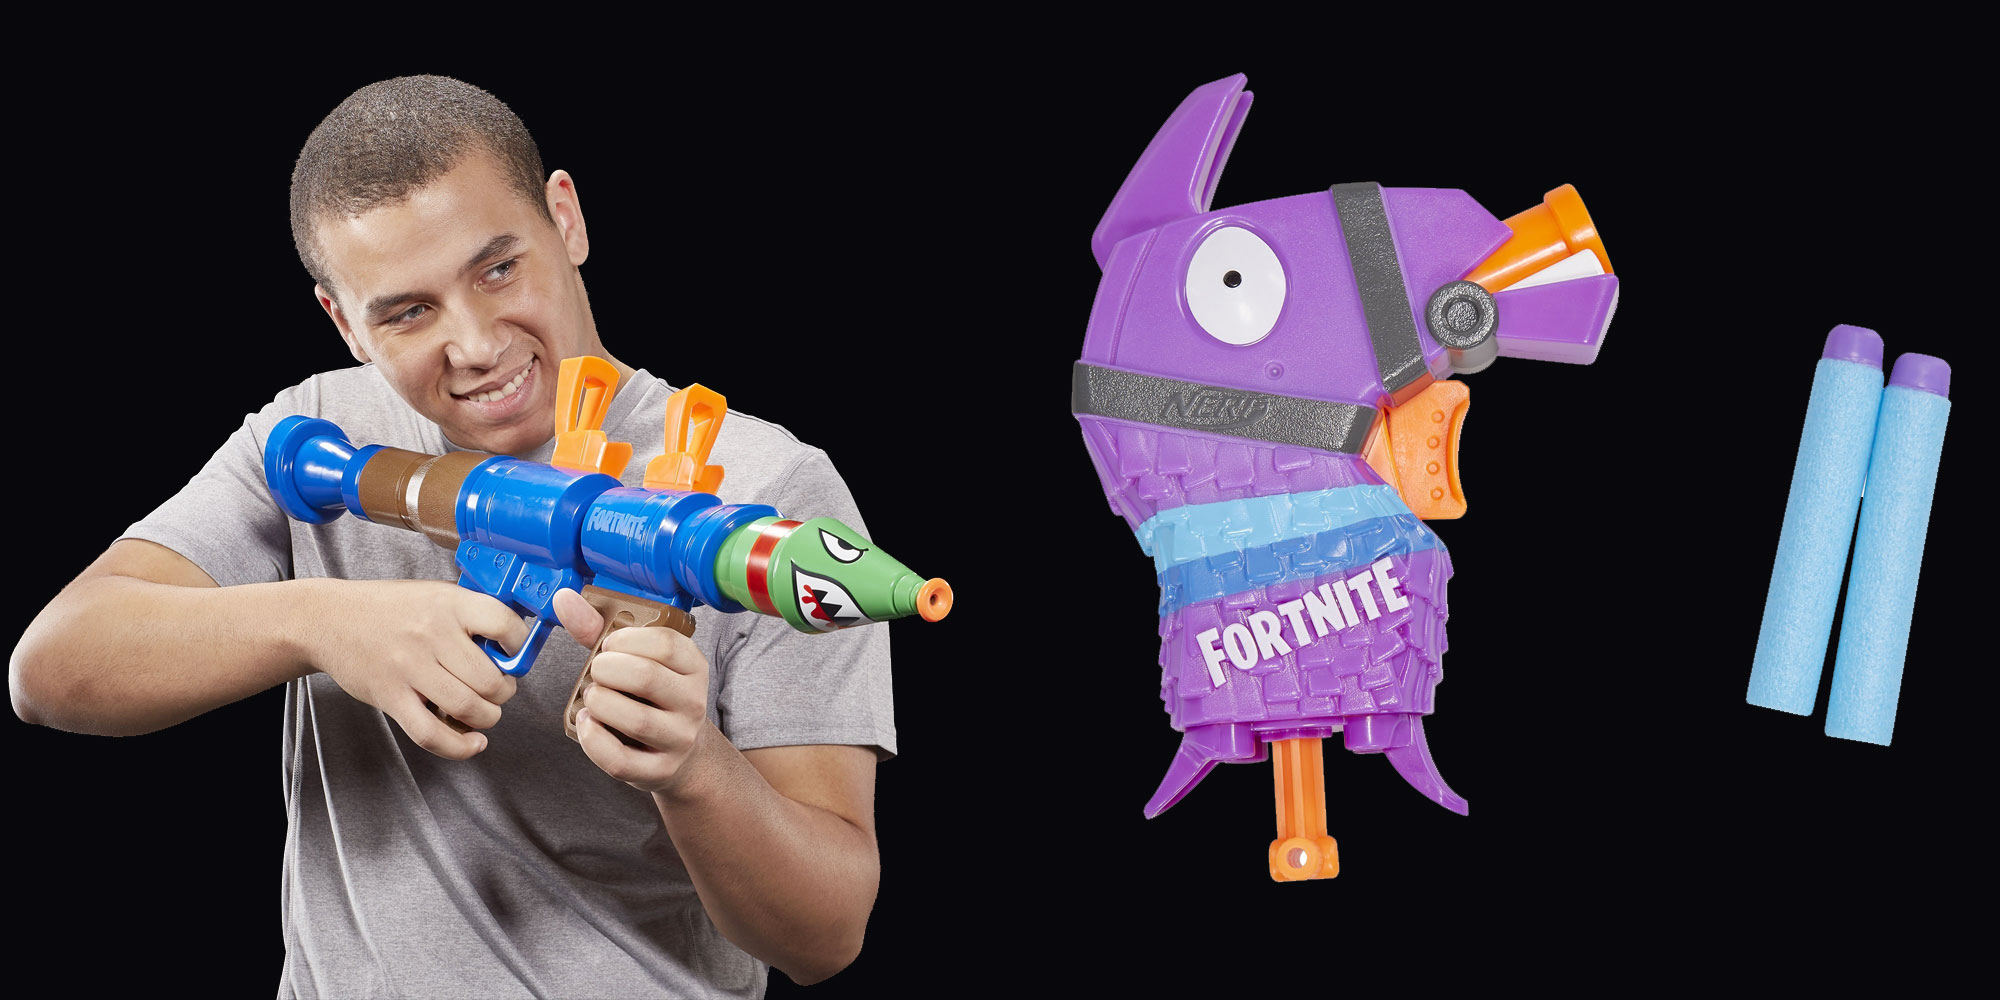 The Fortnite X Nerf Crossover Is Finally Here W Prices From 10 9to5toys